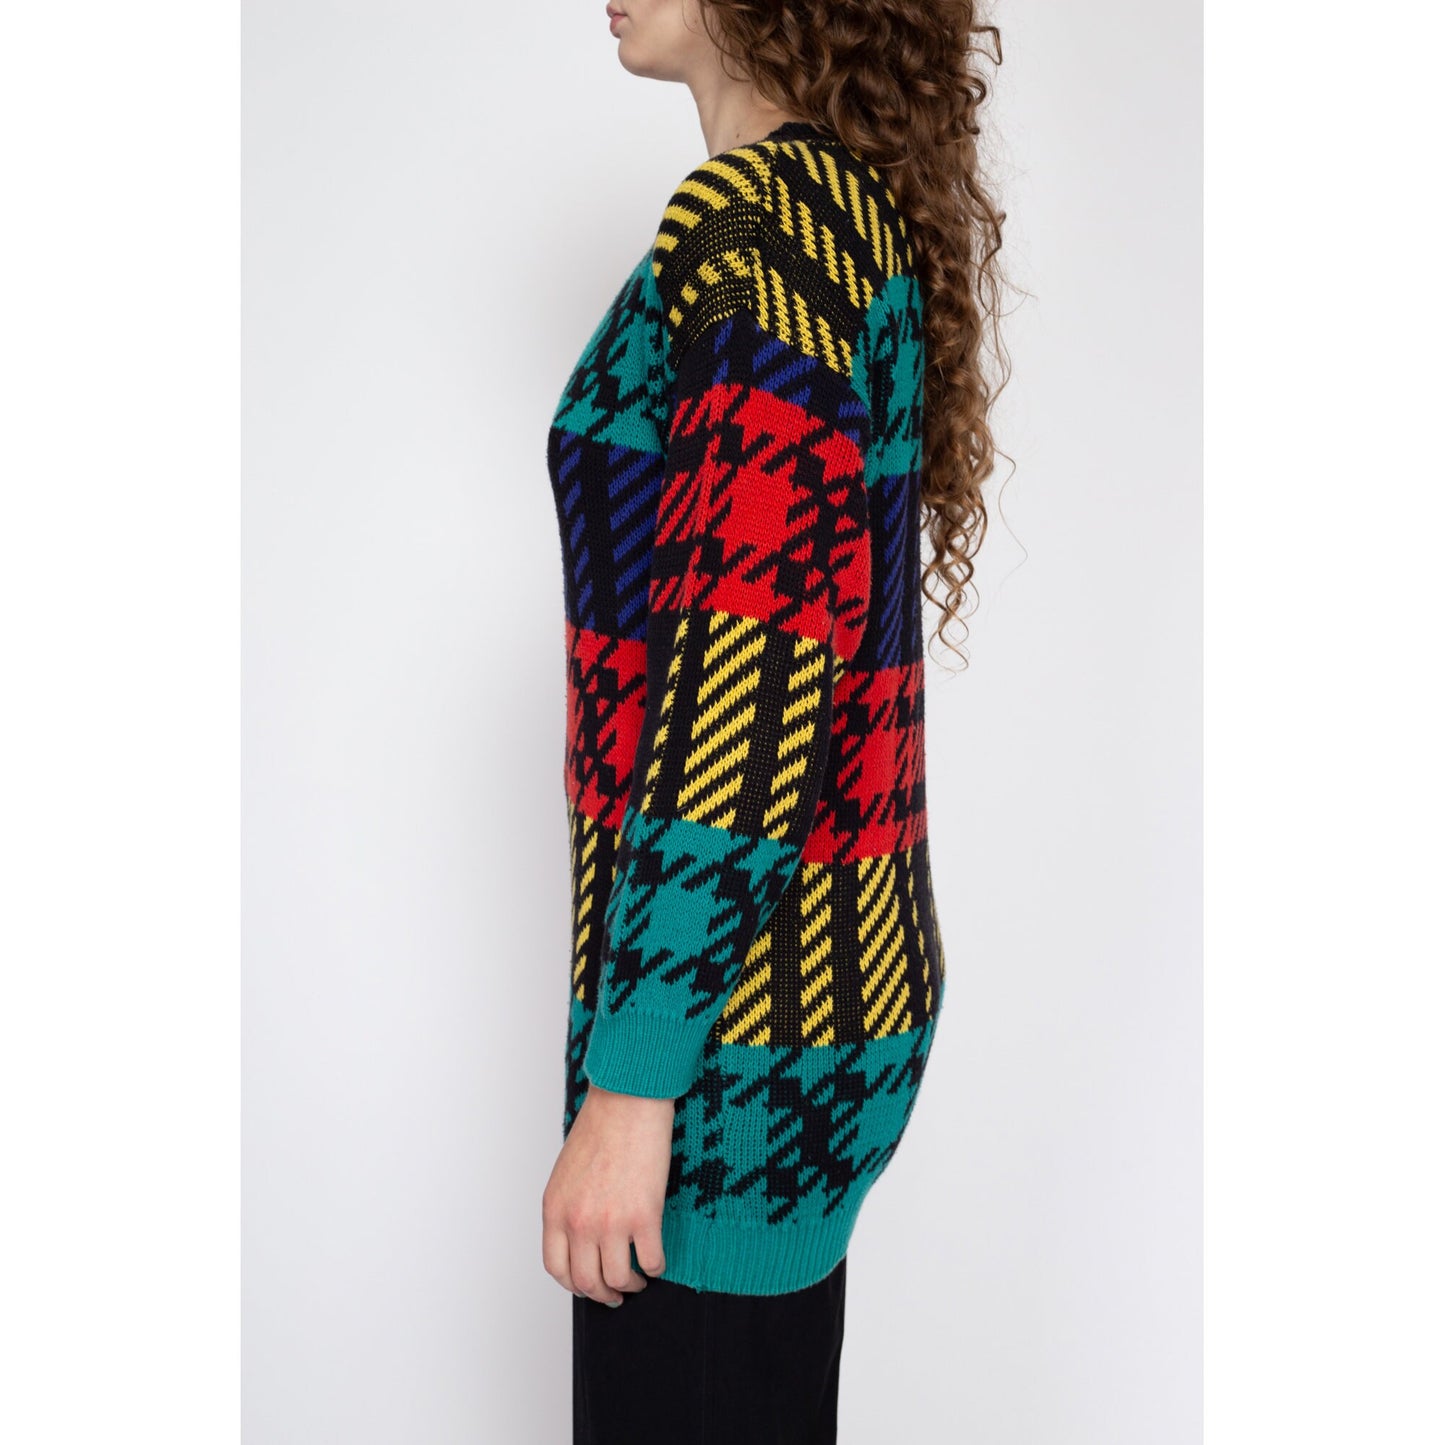 Small 90s Colorful Plaid Long Sweater | Vintage Maximalist Slouchy Knit Pullover